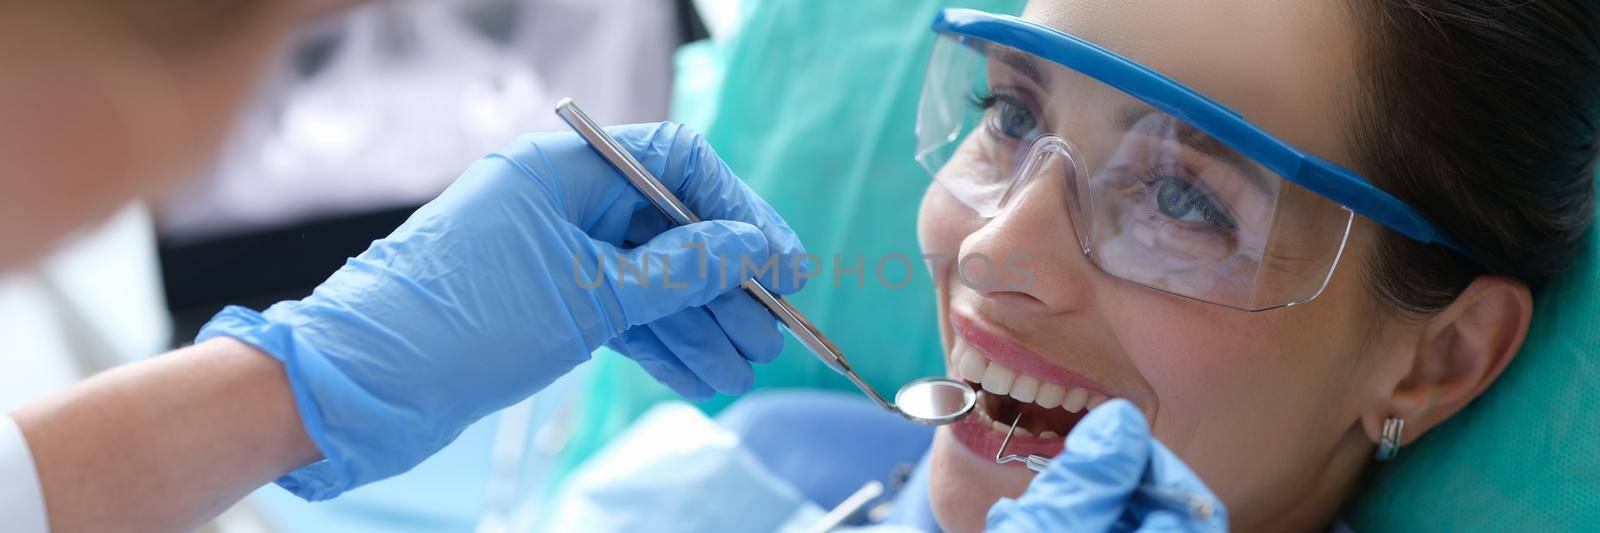 Doctor examining oral cavity of female patient using dental instruments in clinic by kuprevich